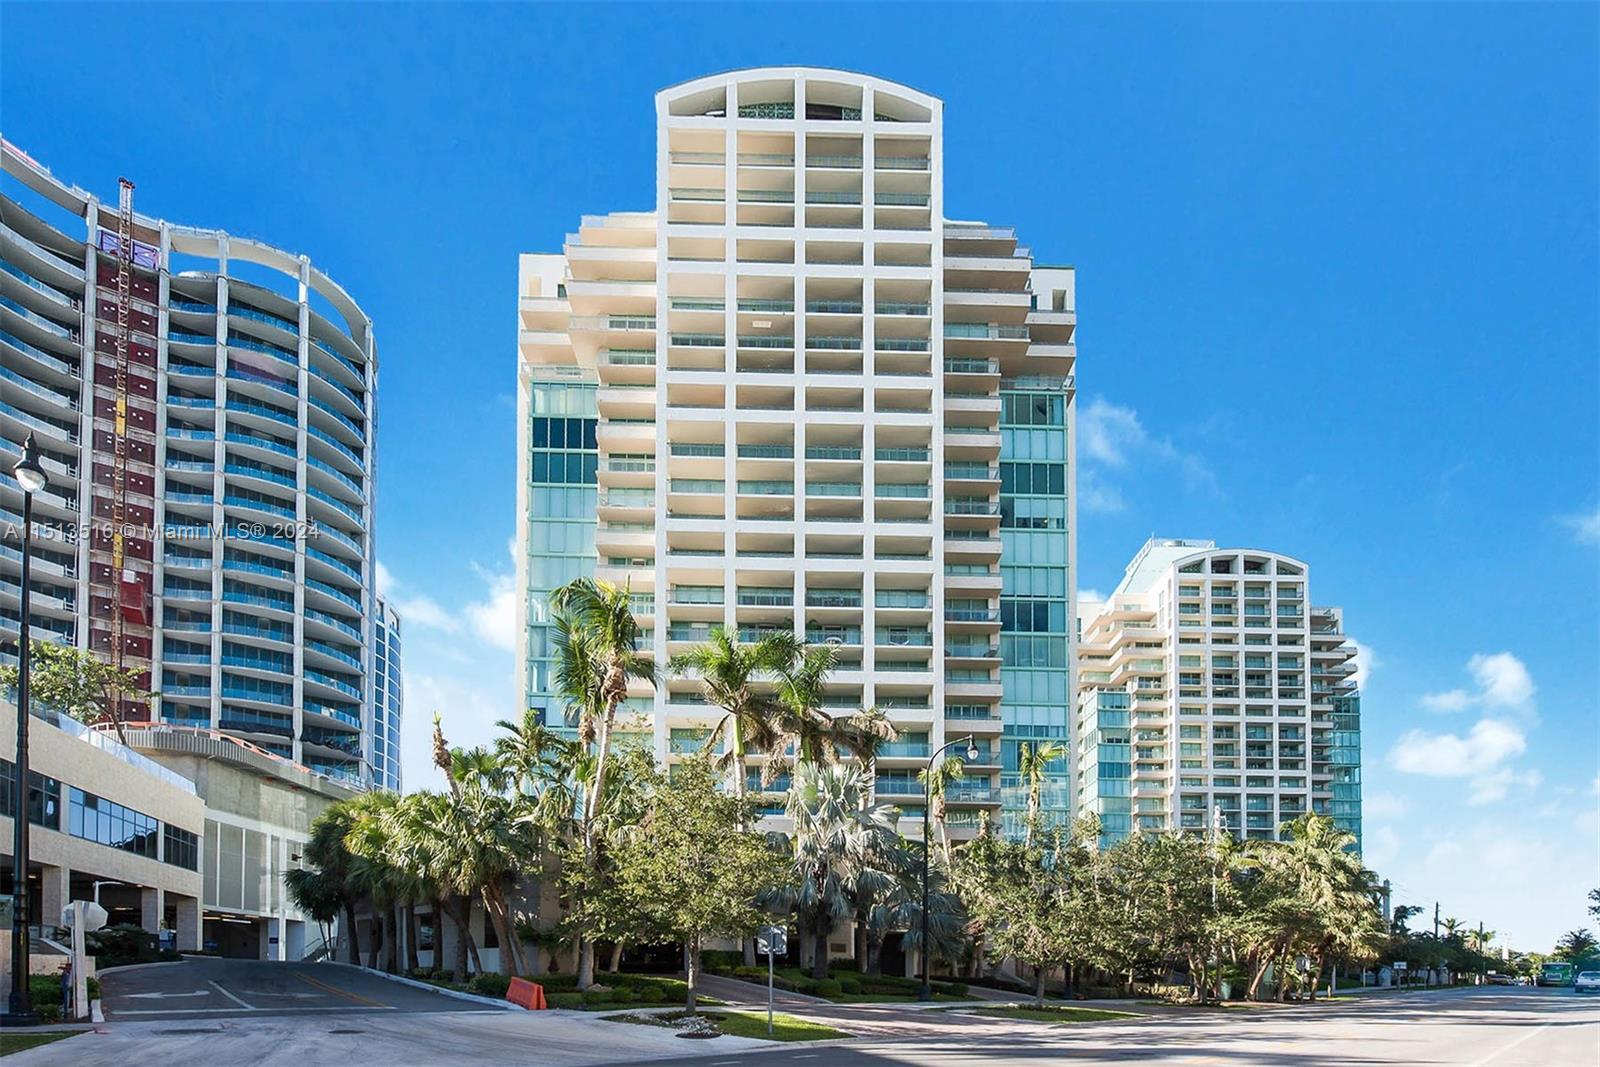 Photo of 3400 SW 27 Ave #306 in Coconut Grove, FL